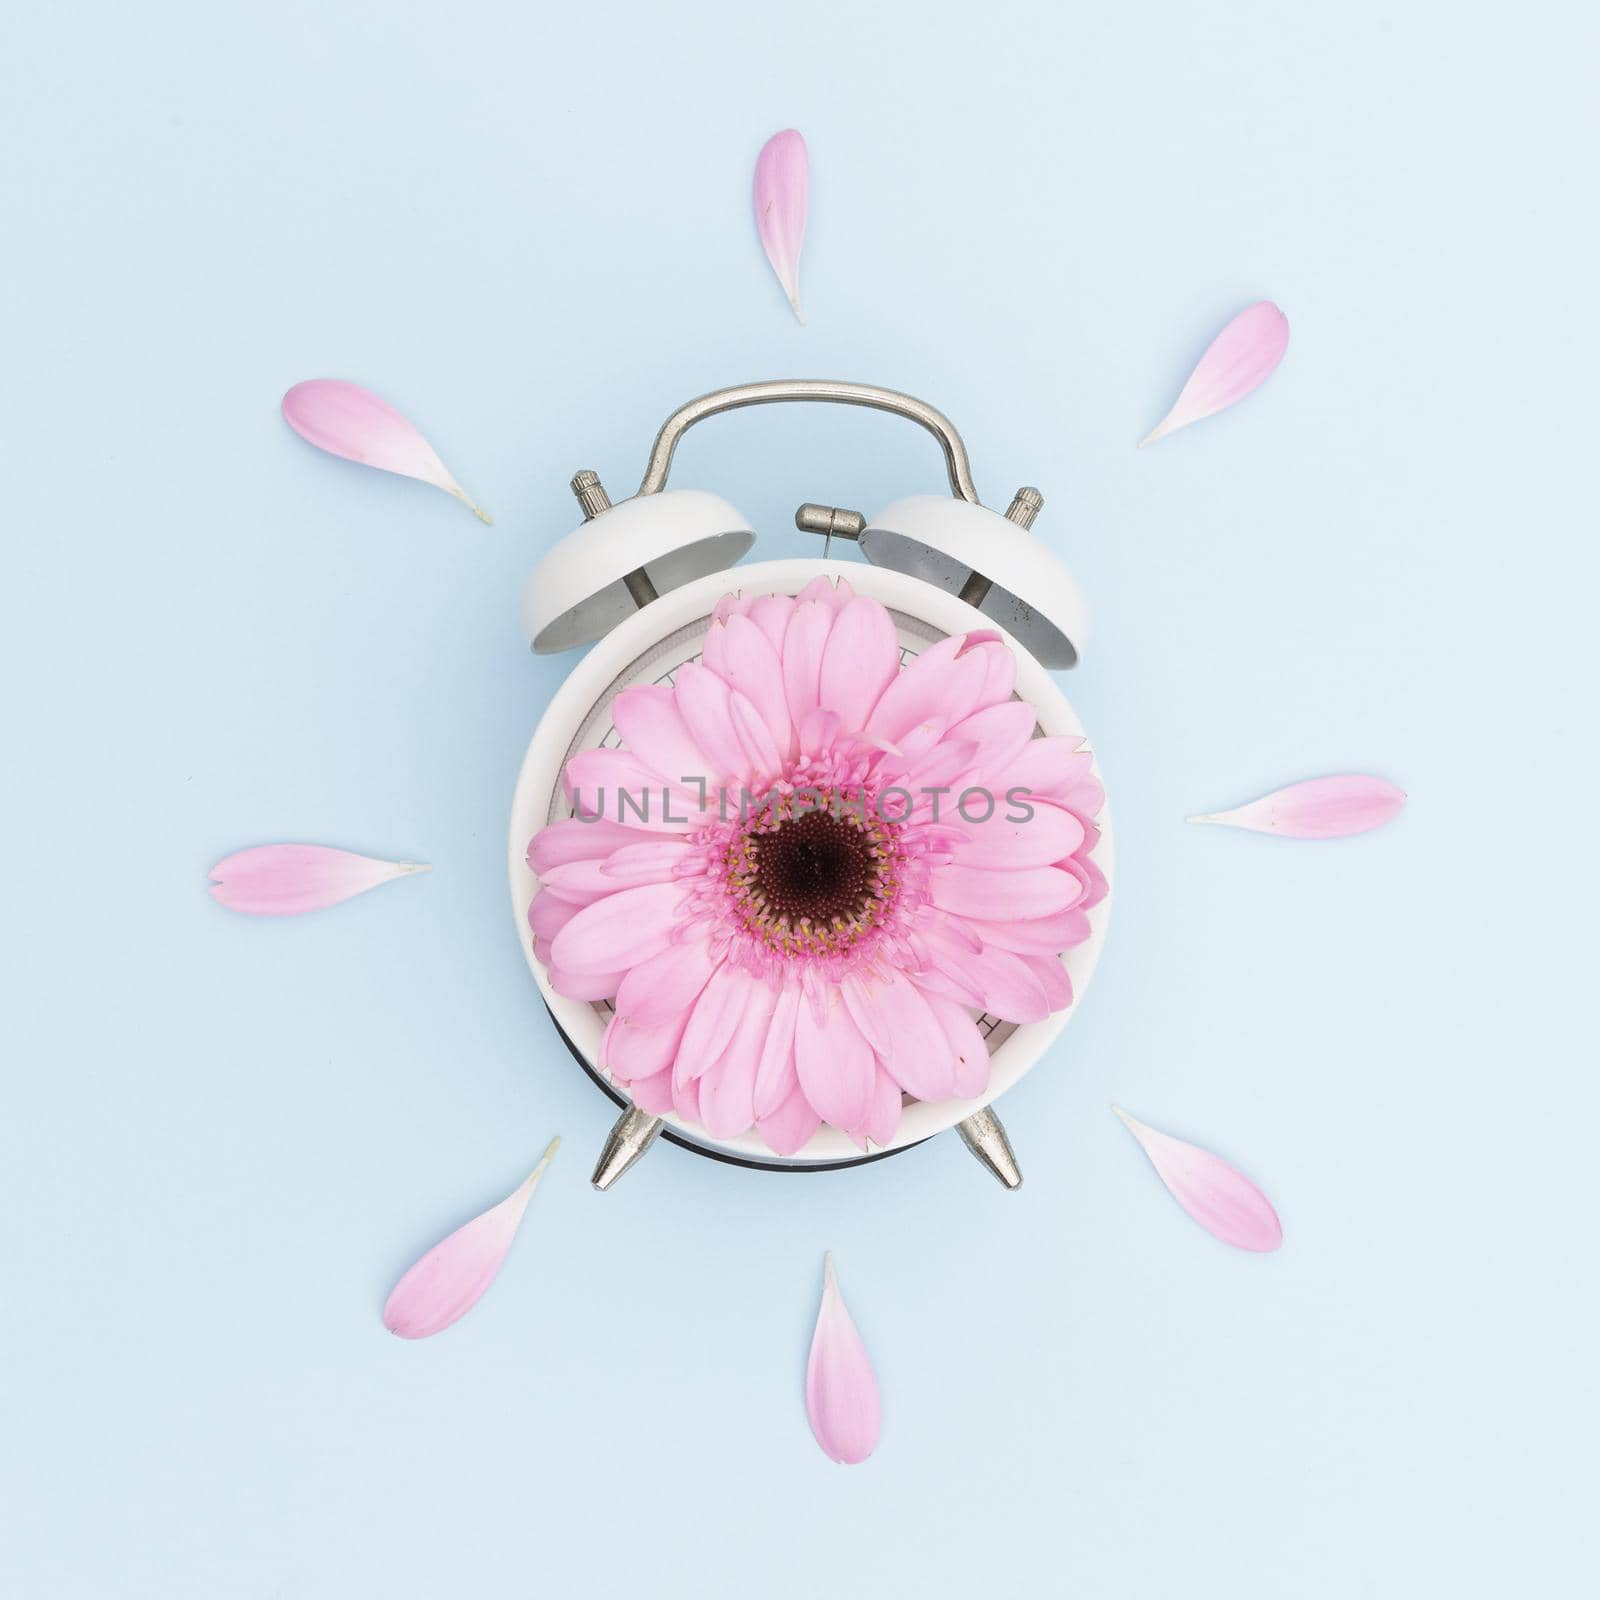 top view arrangement with pink daisy clock2. Resolution and high quality beautiful photo